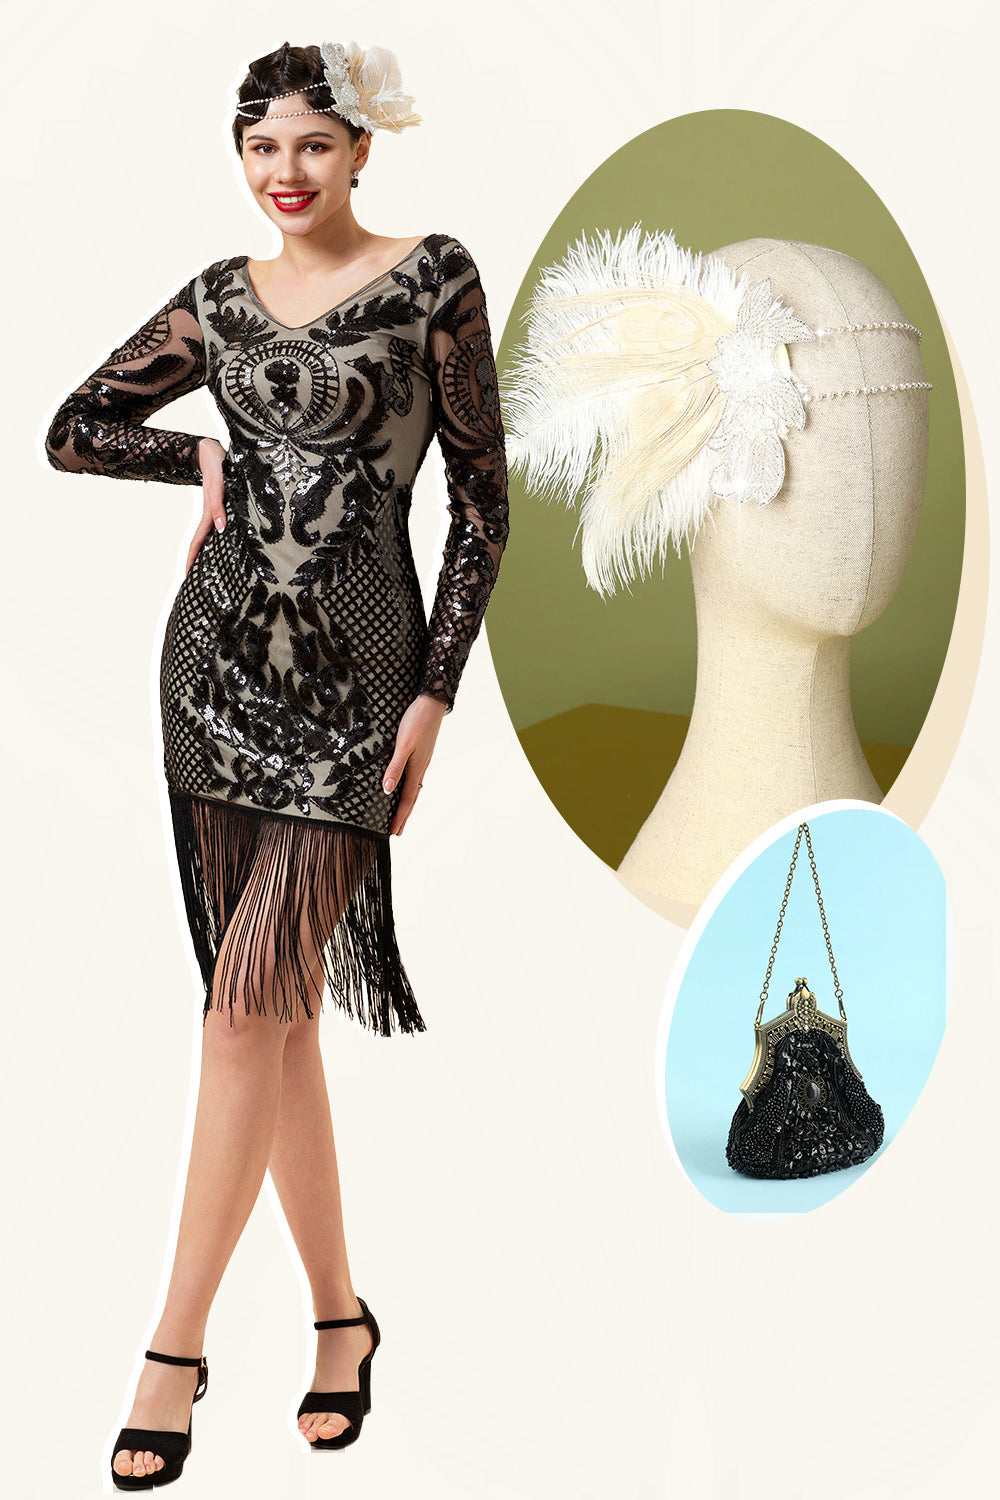 Black Long Sleeves Sequined Fringes 1920s Gatsby Flapper Dress with 20s Accessories Set